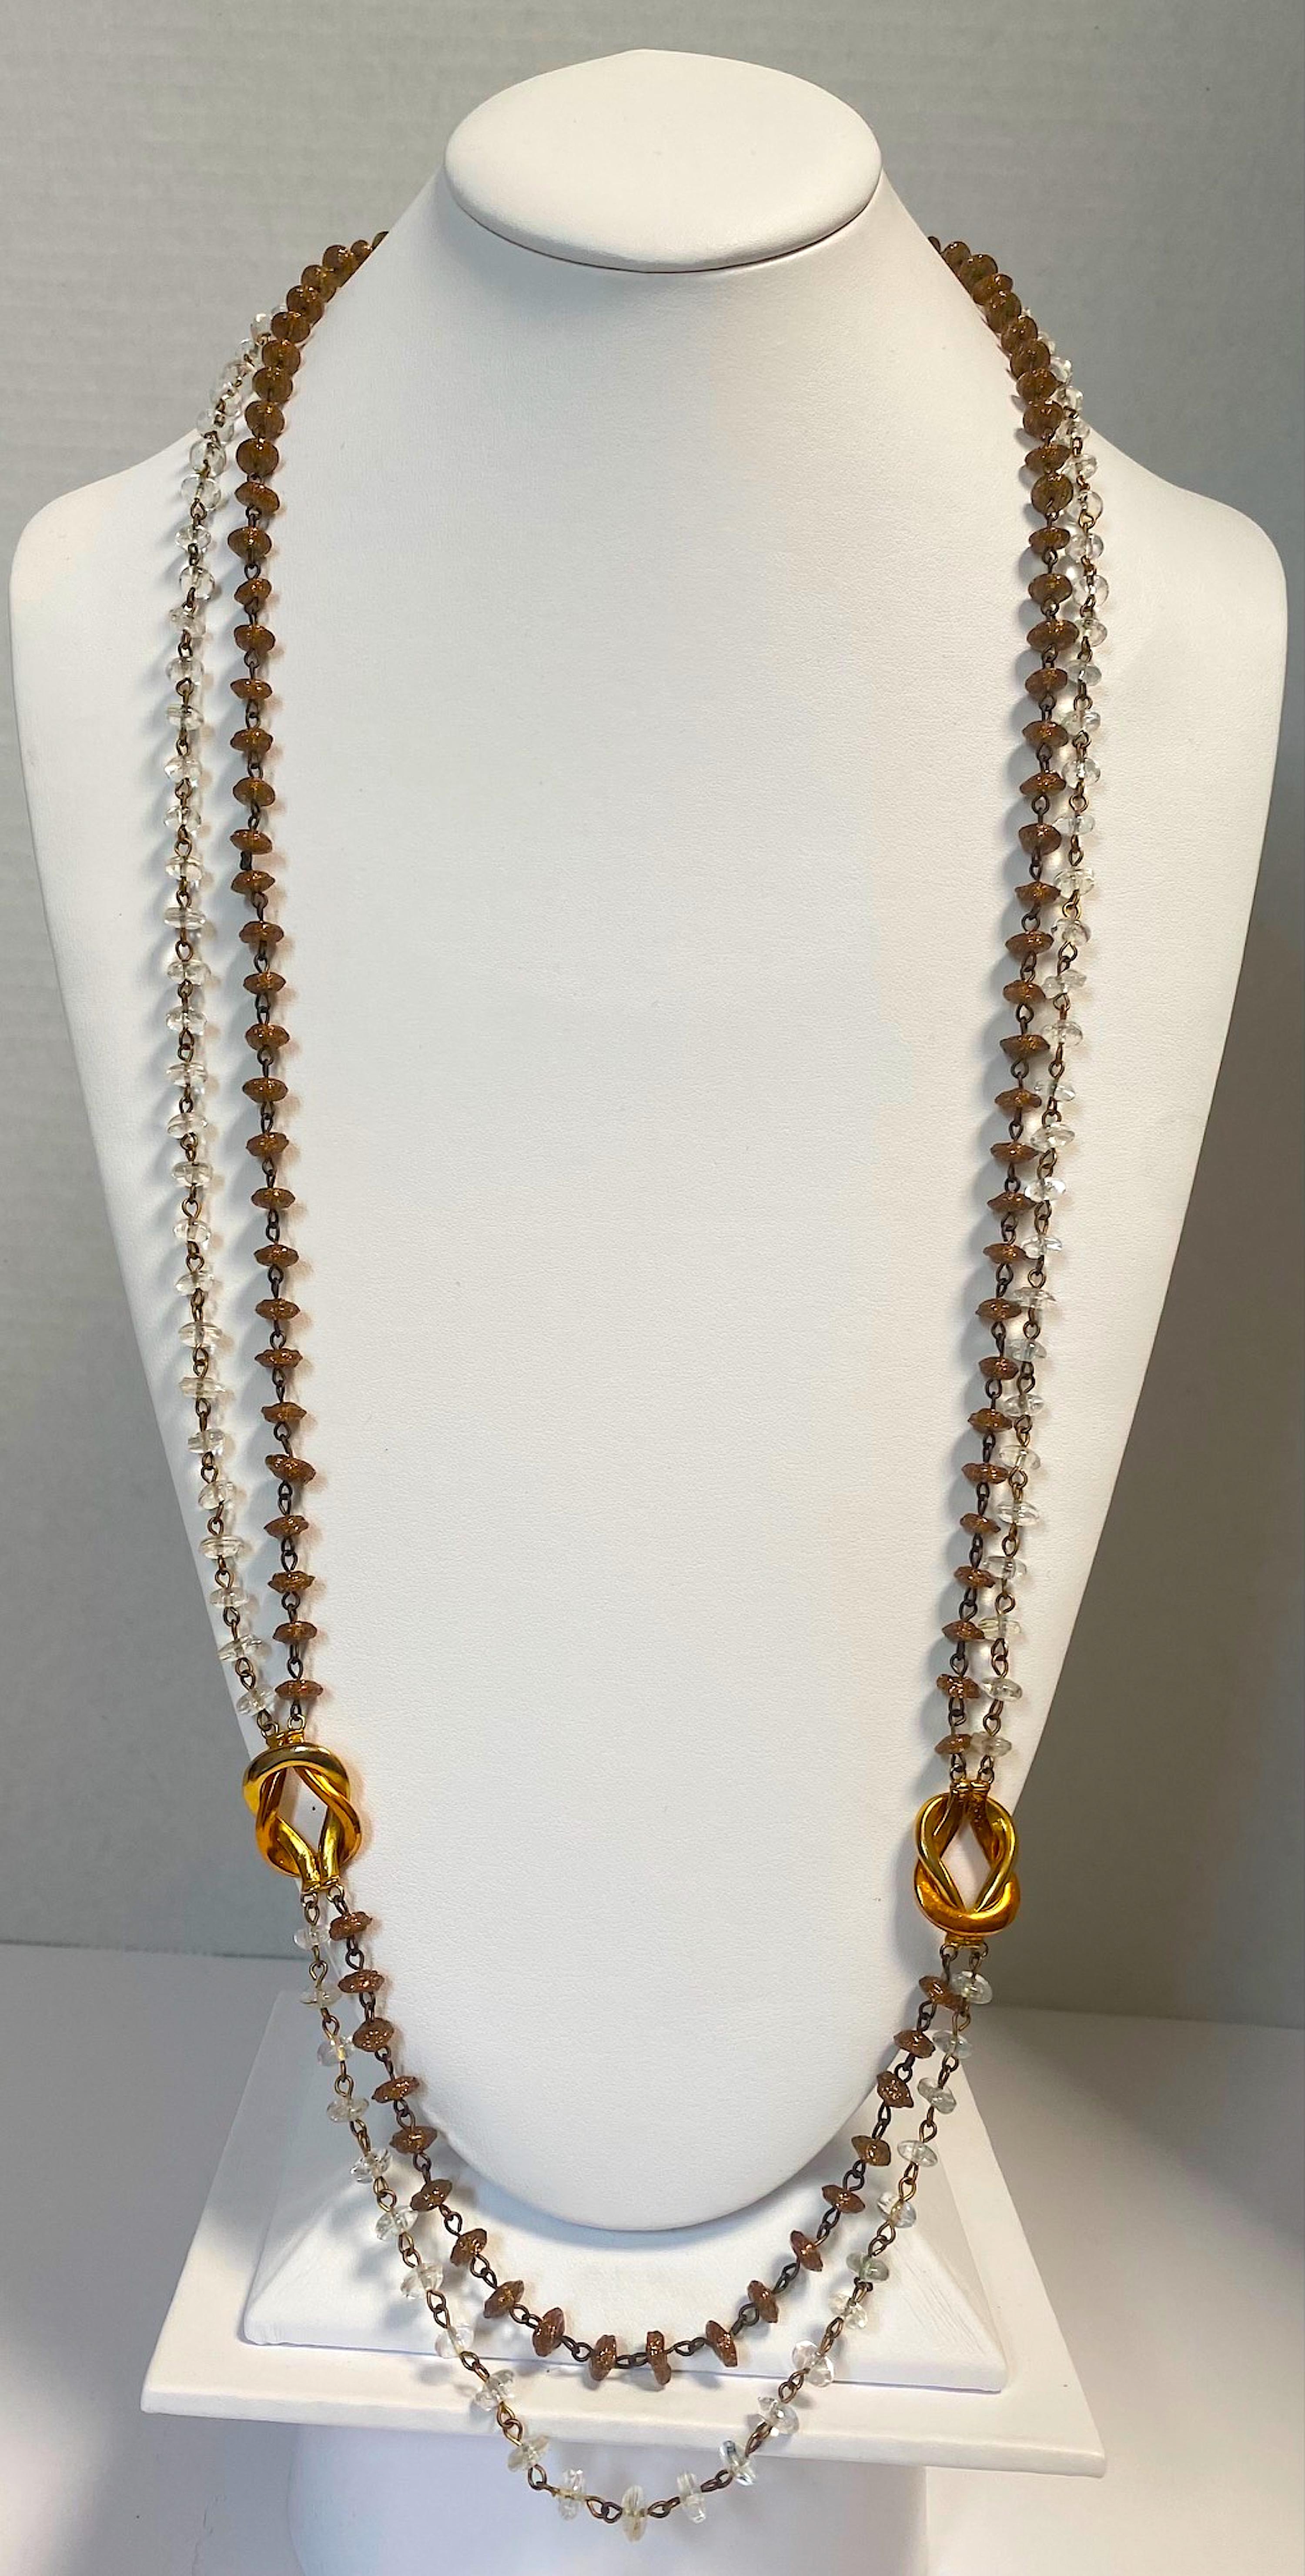 A beautiful and rare design glass bead necklace by famous Italian glass house Seguso. The two stands are comprised of hand made small disk beads individually hand made. Each bead is unique and irregular in shape intensionally. The inner stand is